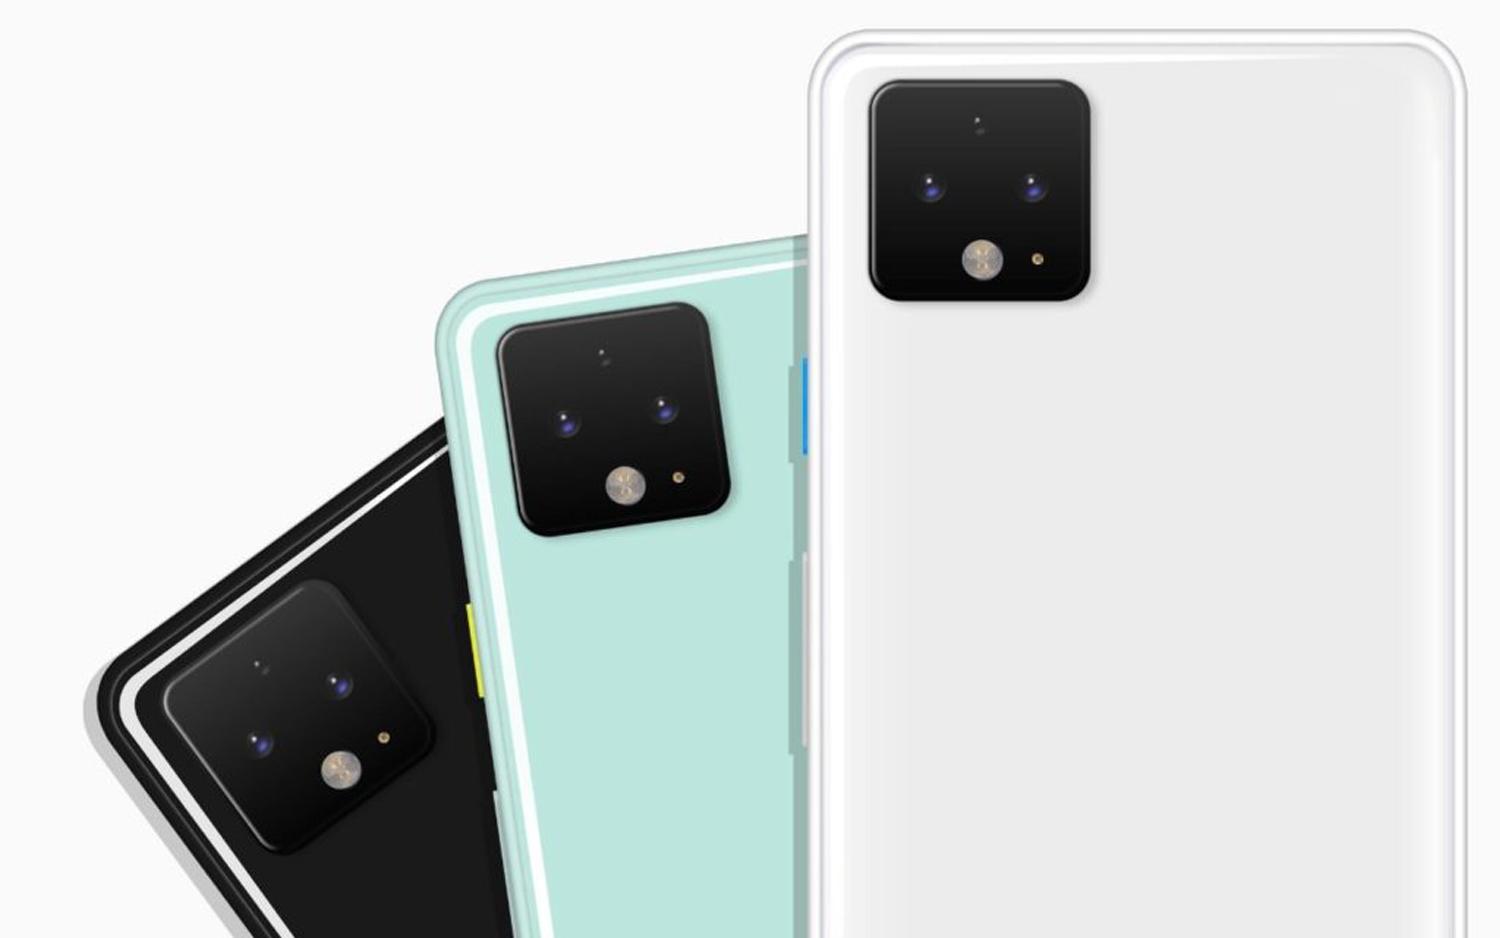 Feast Your Eyes on the Pixel 4 in a Fresh New Color